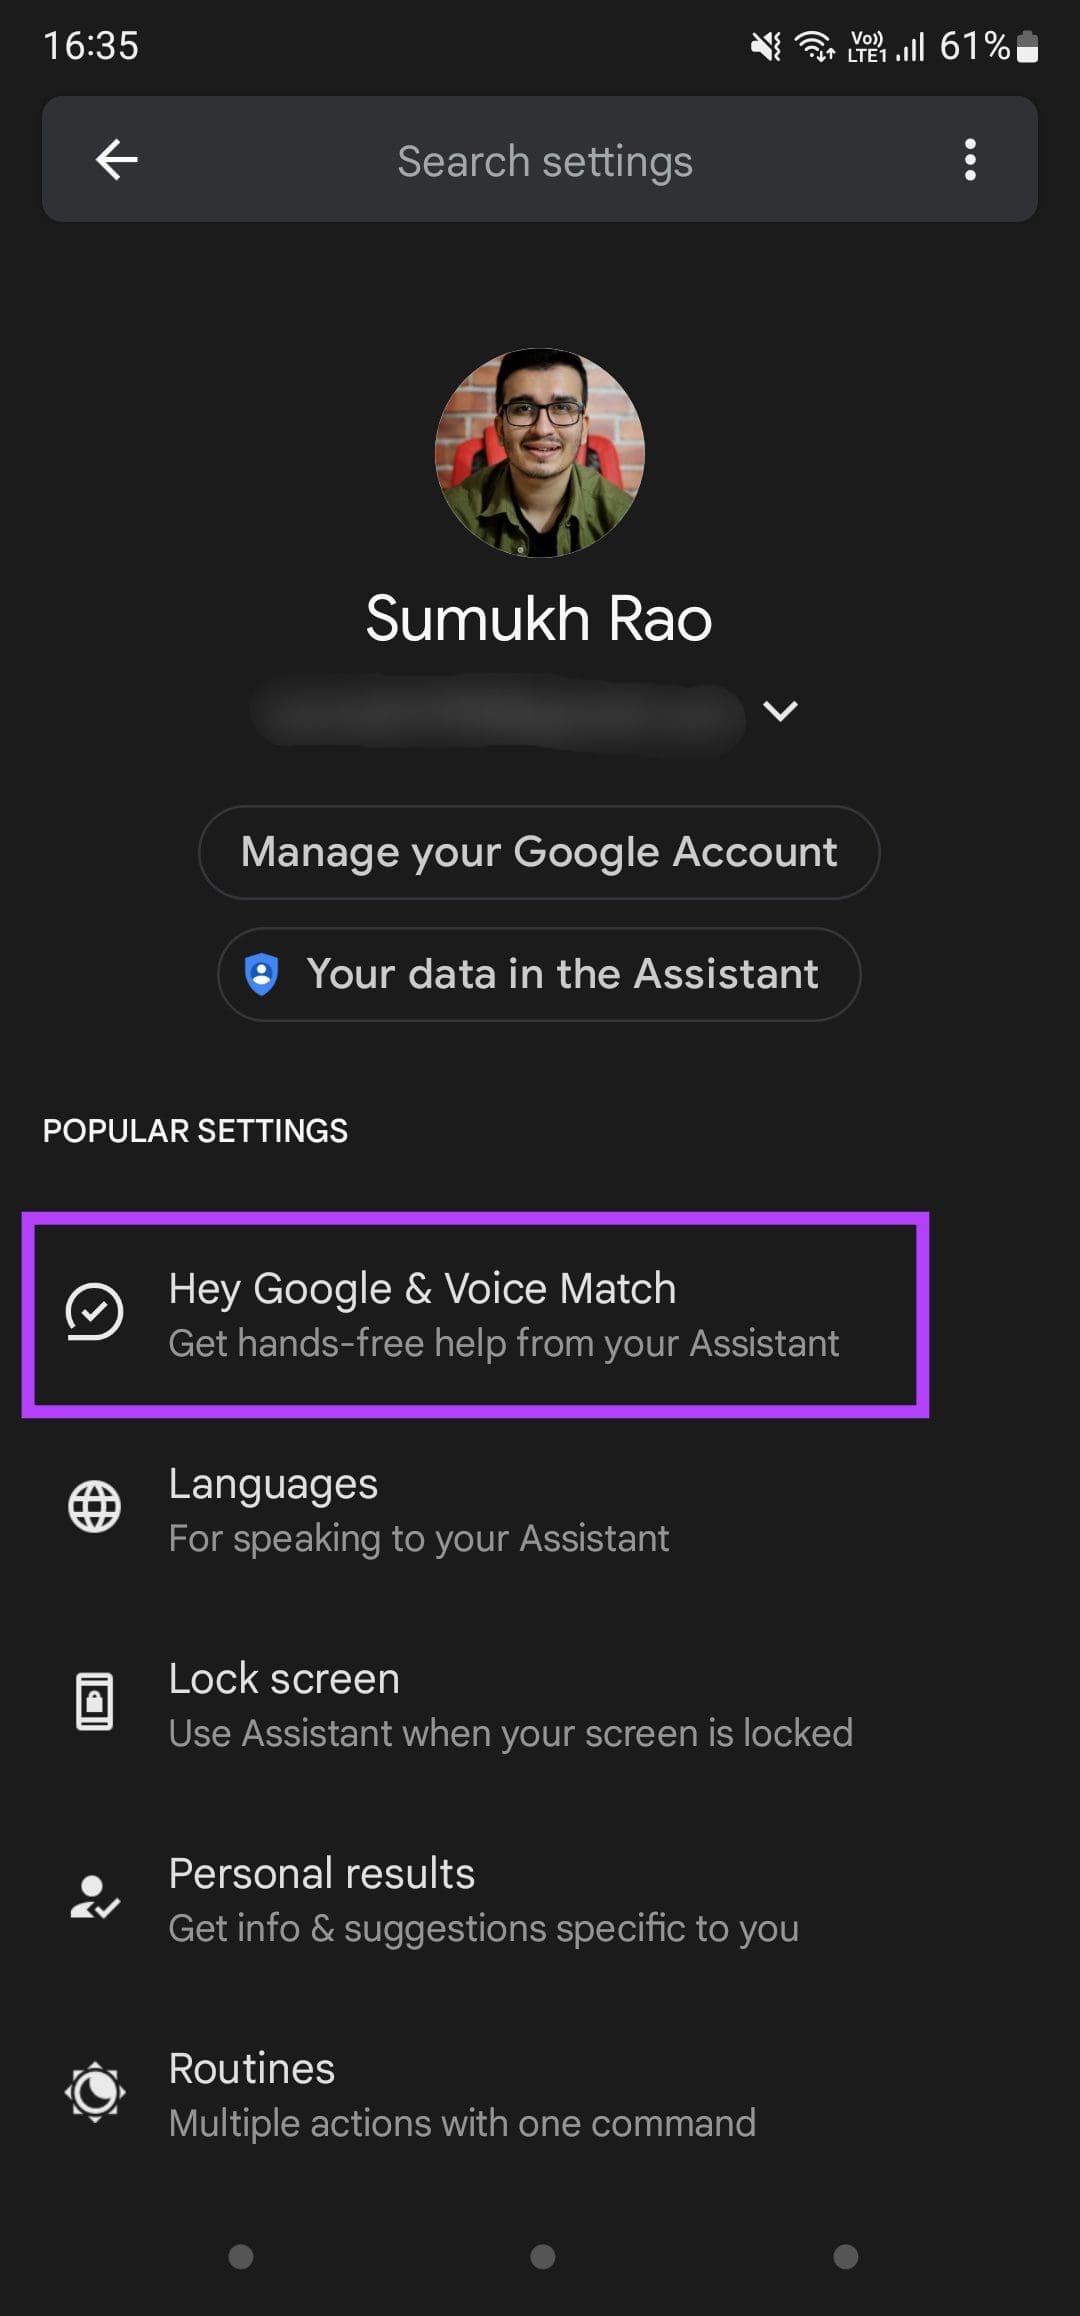 Hey Google and Voice Match